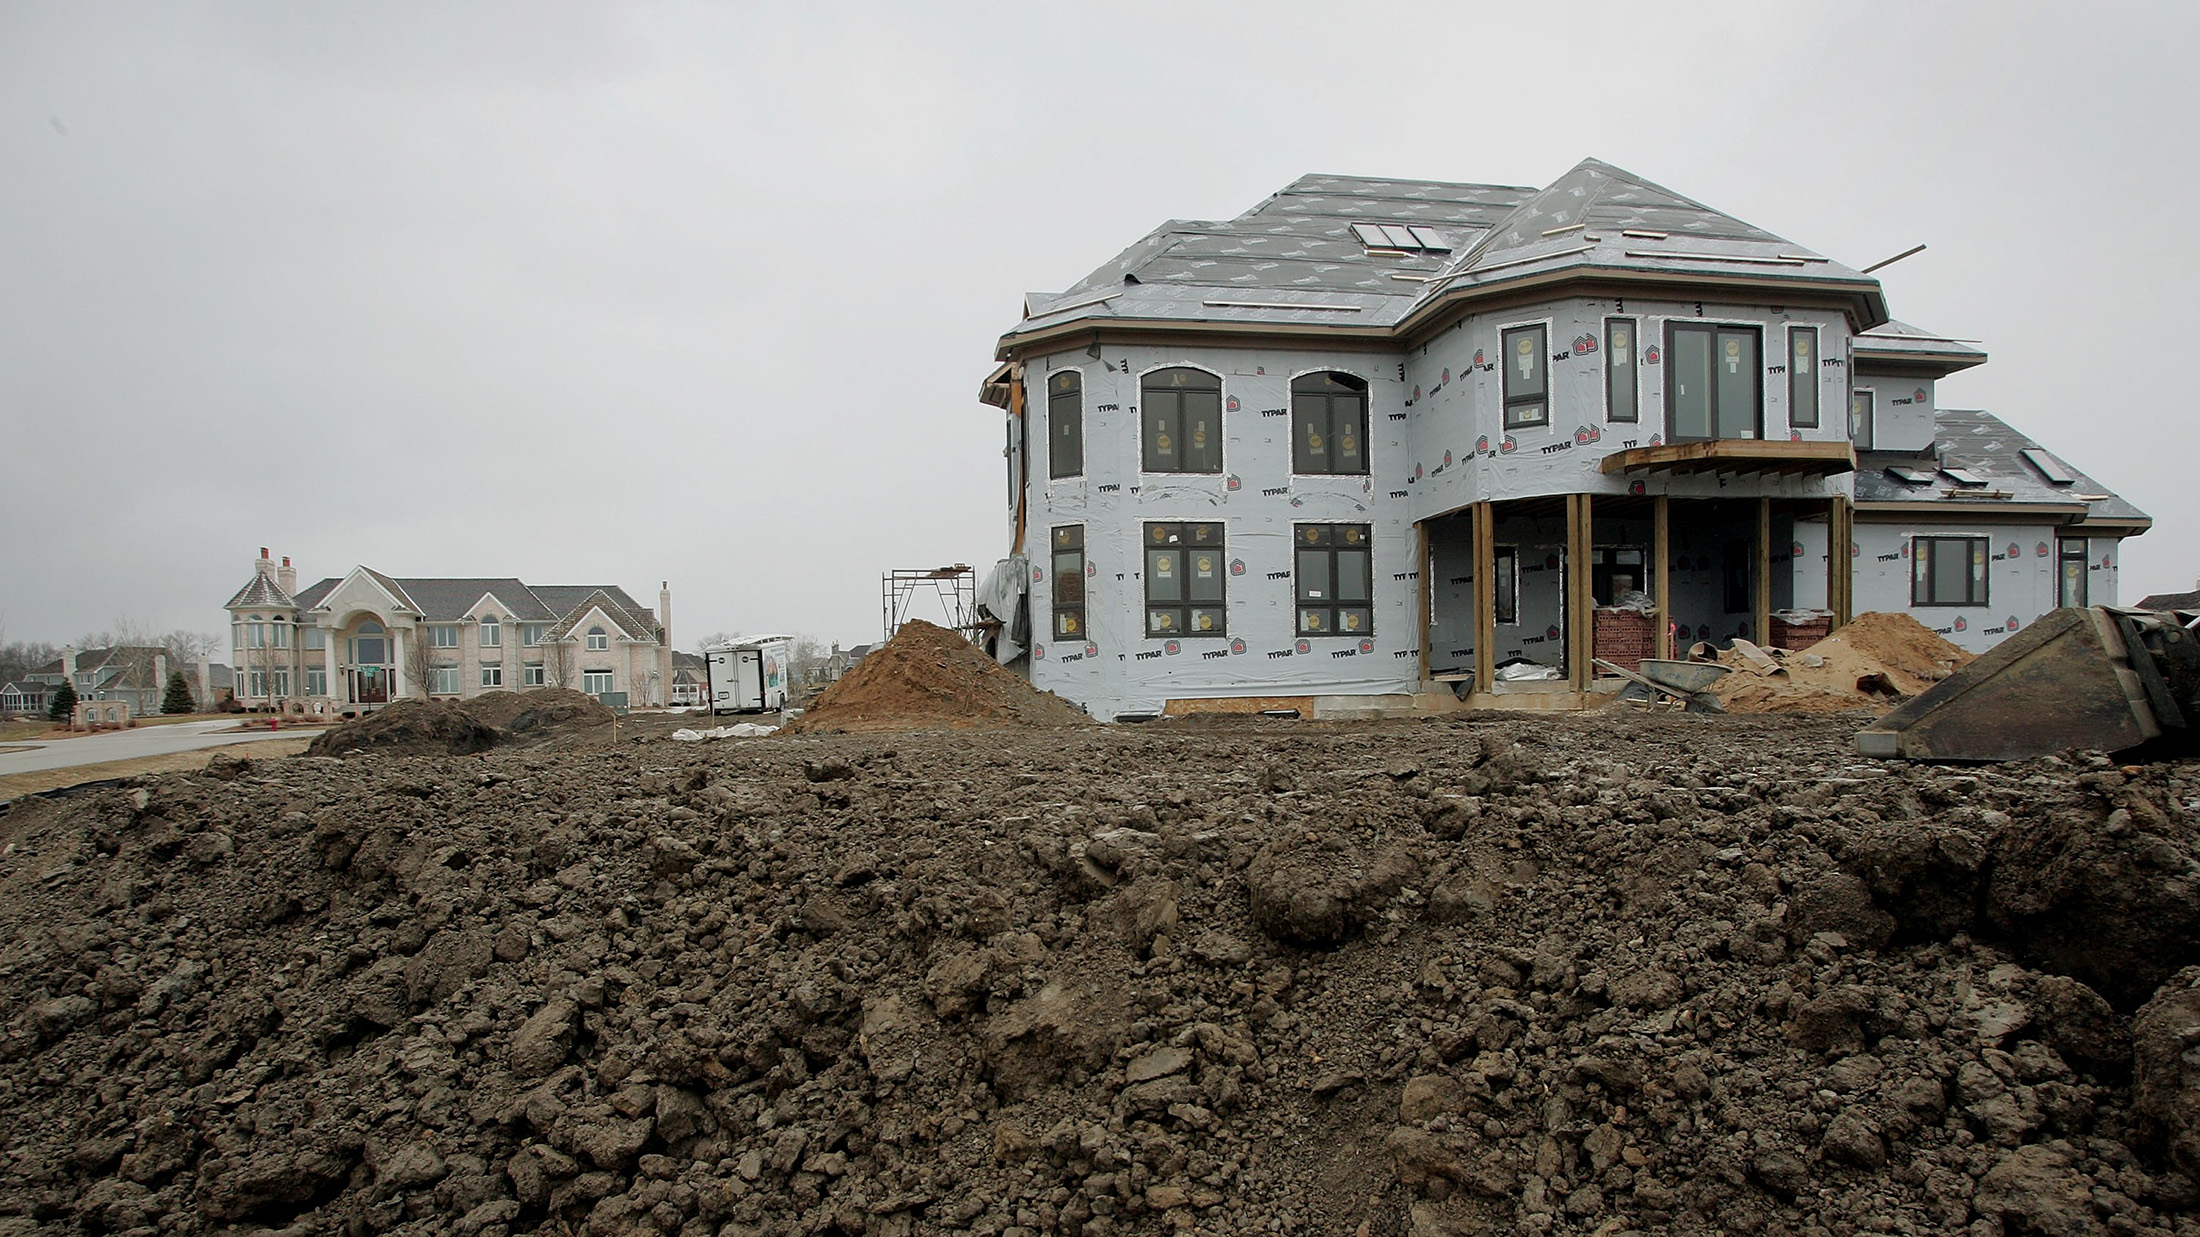 INVERNESS, IL - MARCH 24: A home stands in the later stages of construction March 24, 2006 in Inverness, Illinois. Nationwide new home sales plummeted more than 10 percent in February to their lowest levels in nine years.
